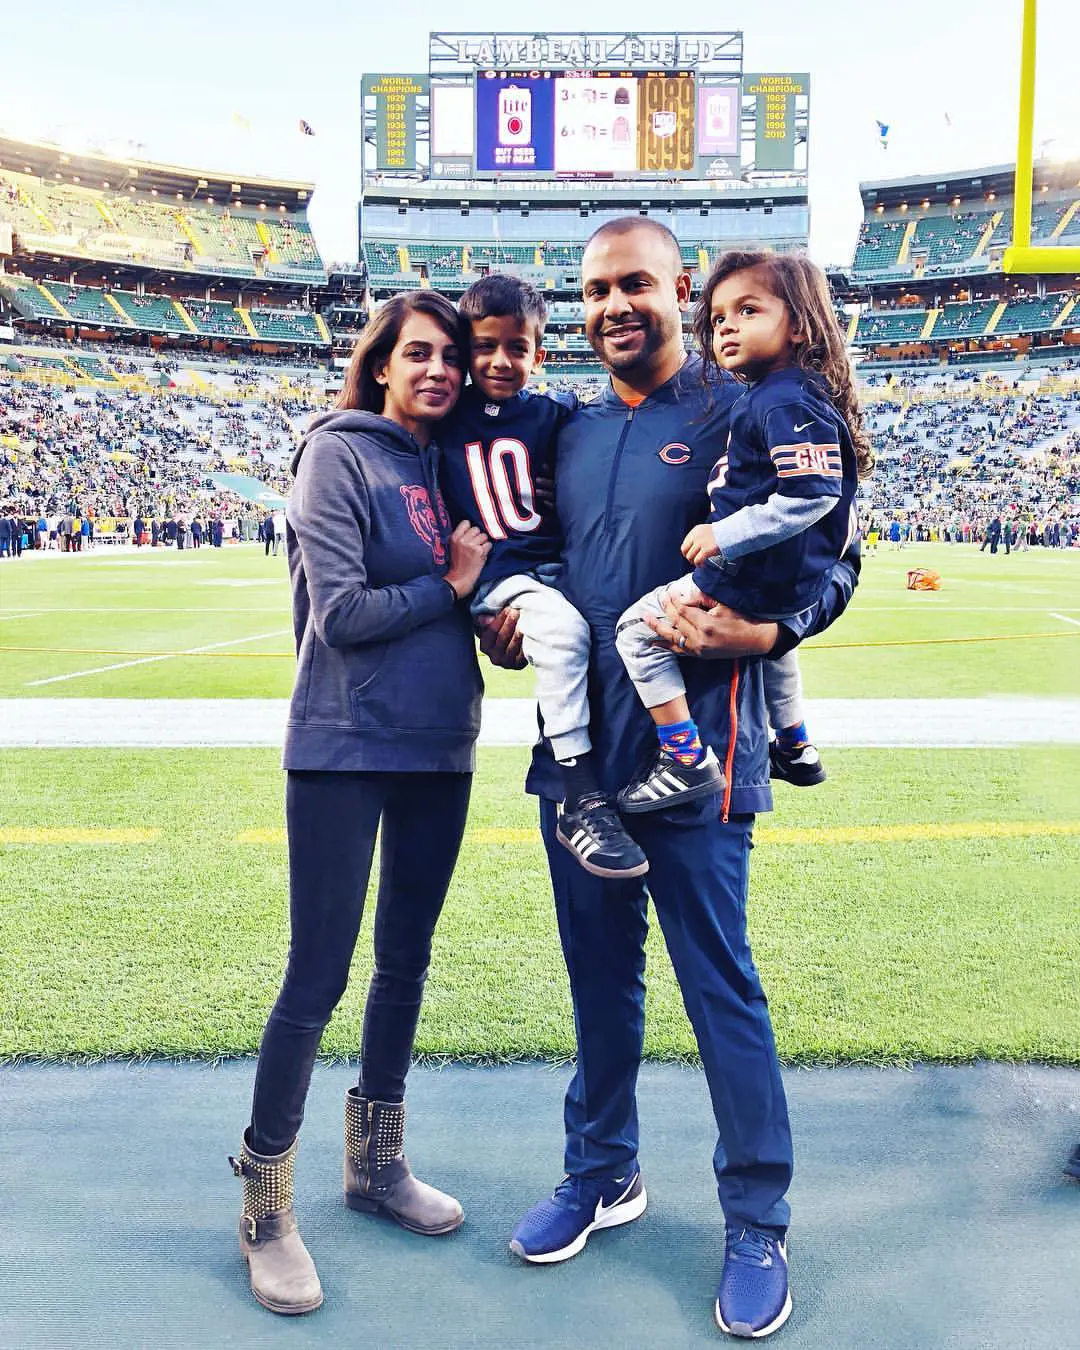 Sean and Ojus with their two kids at the Lambeau Field in 2018